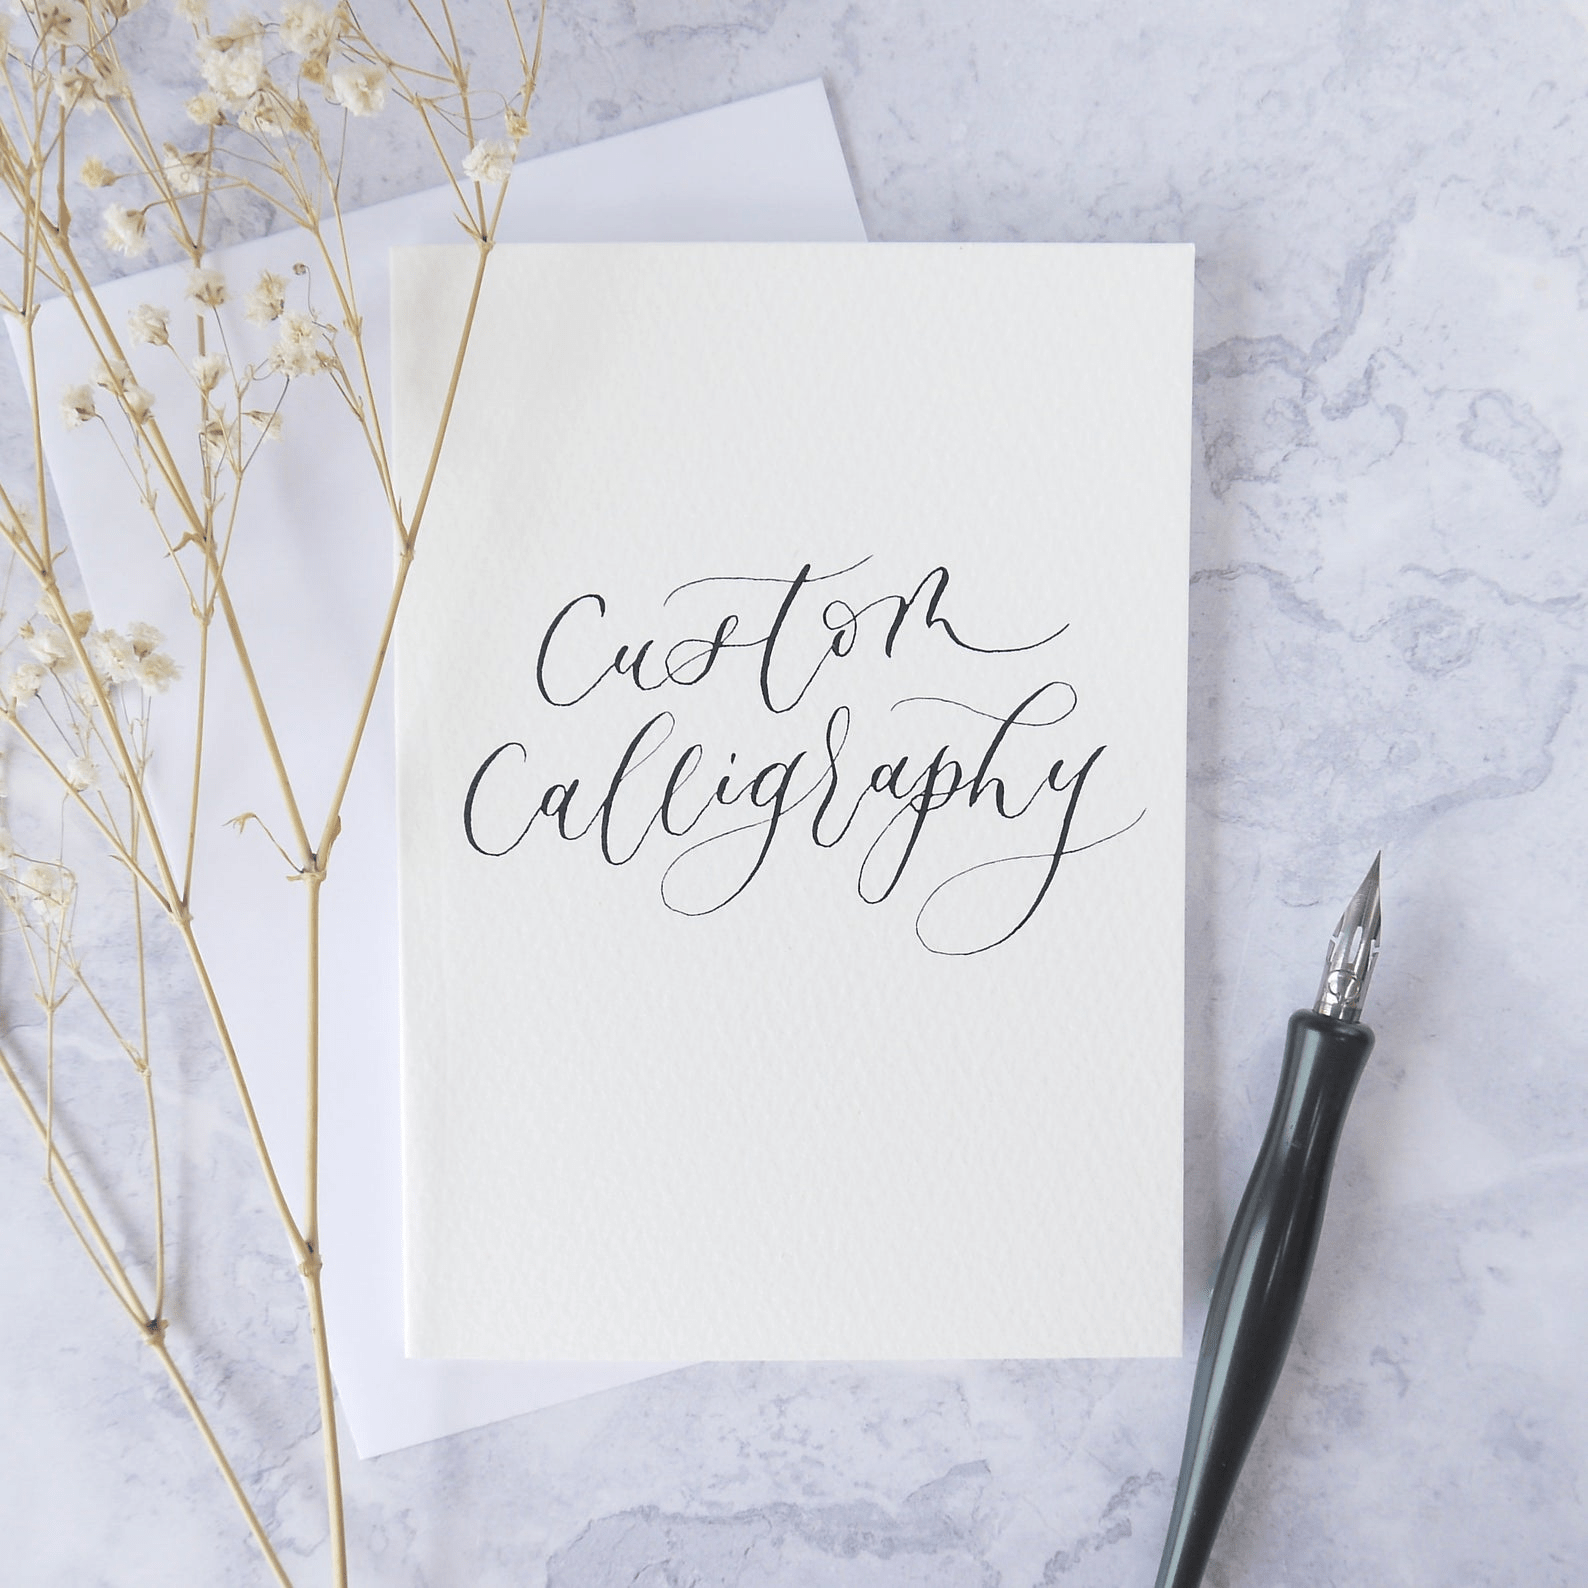 Calligraphy as a side hustle